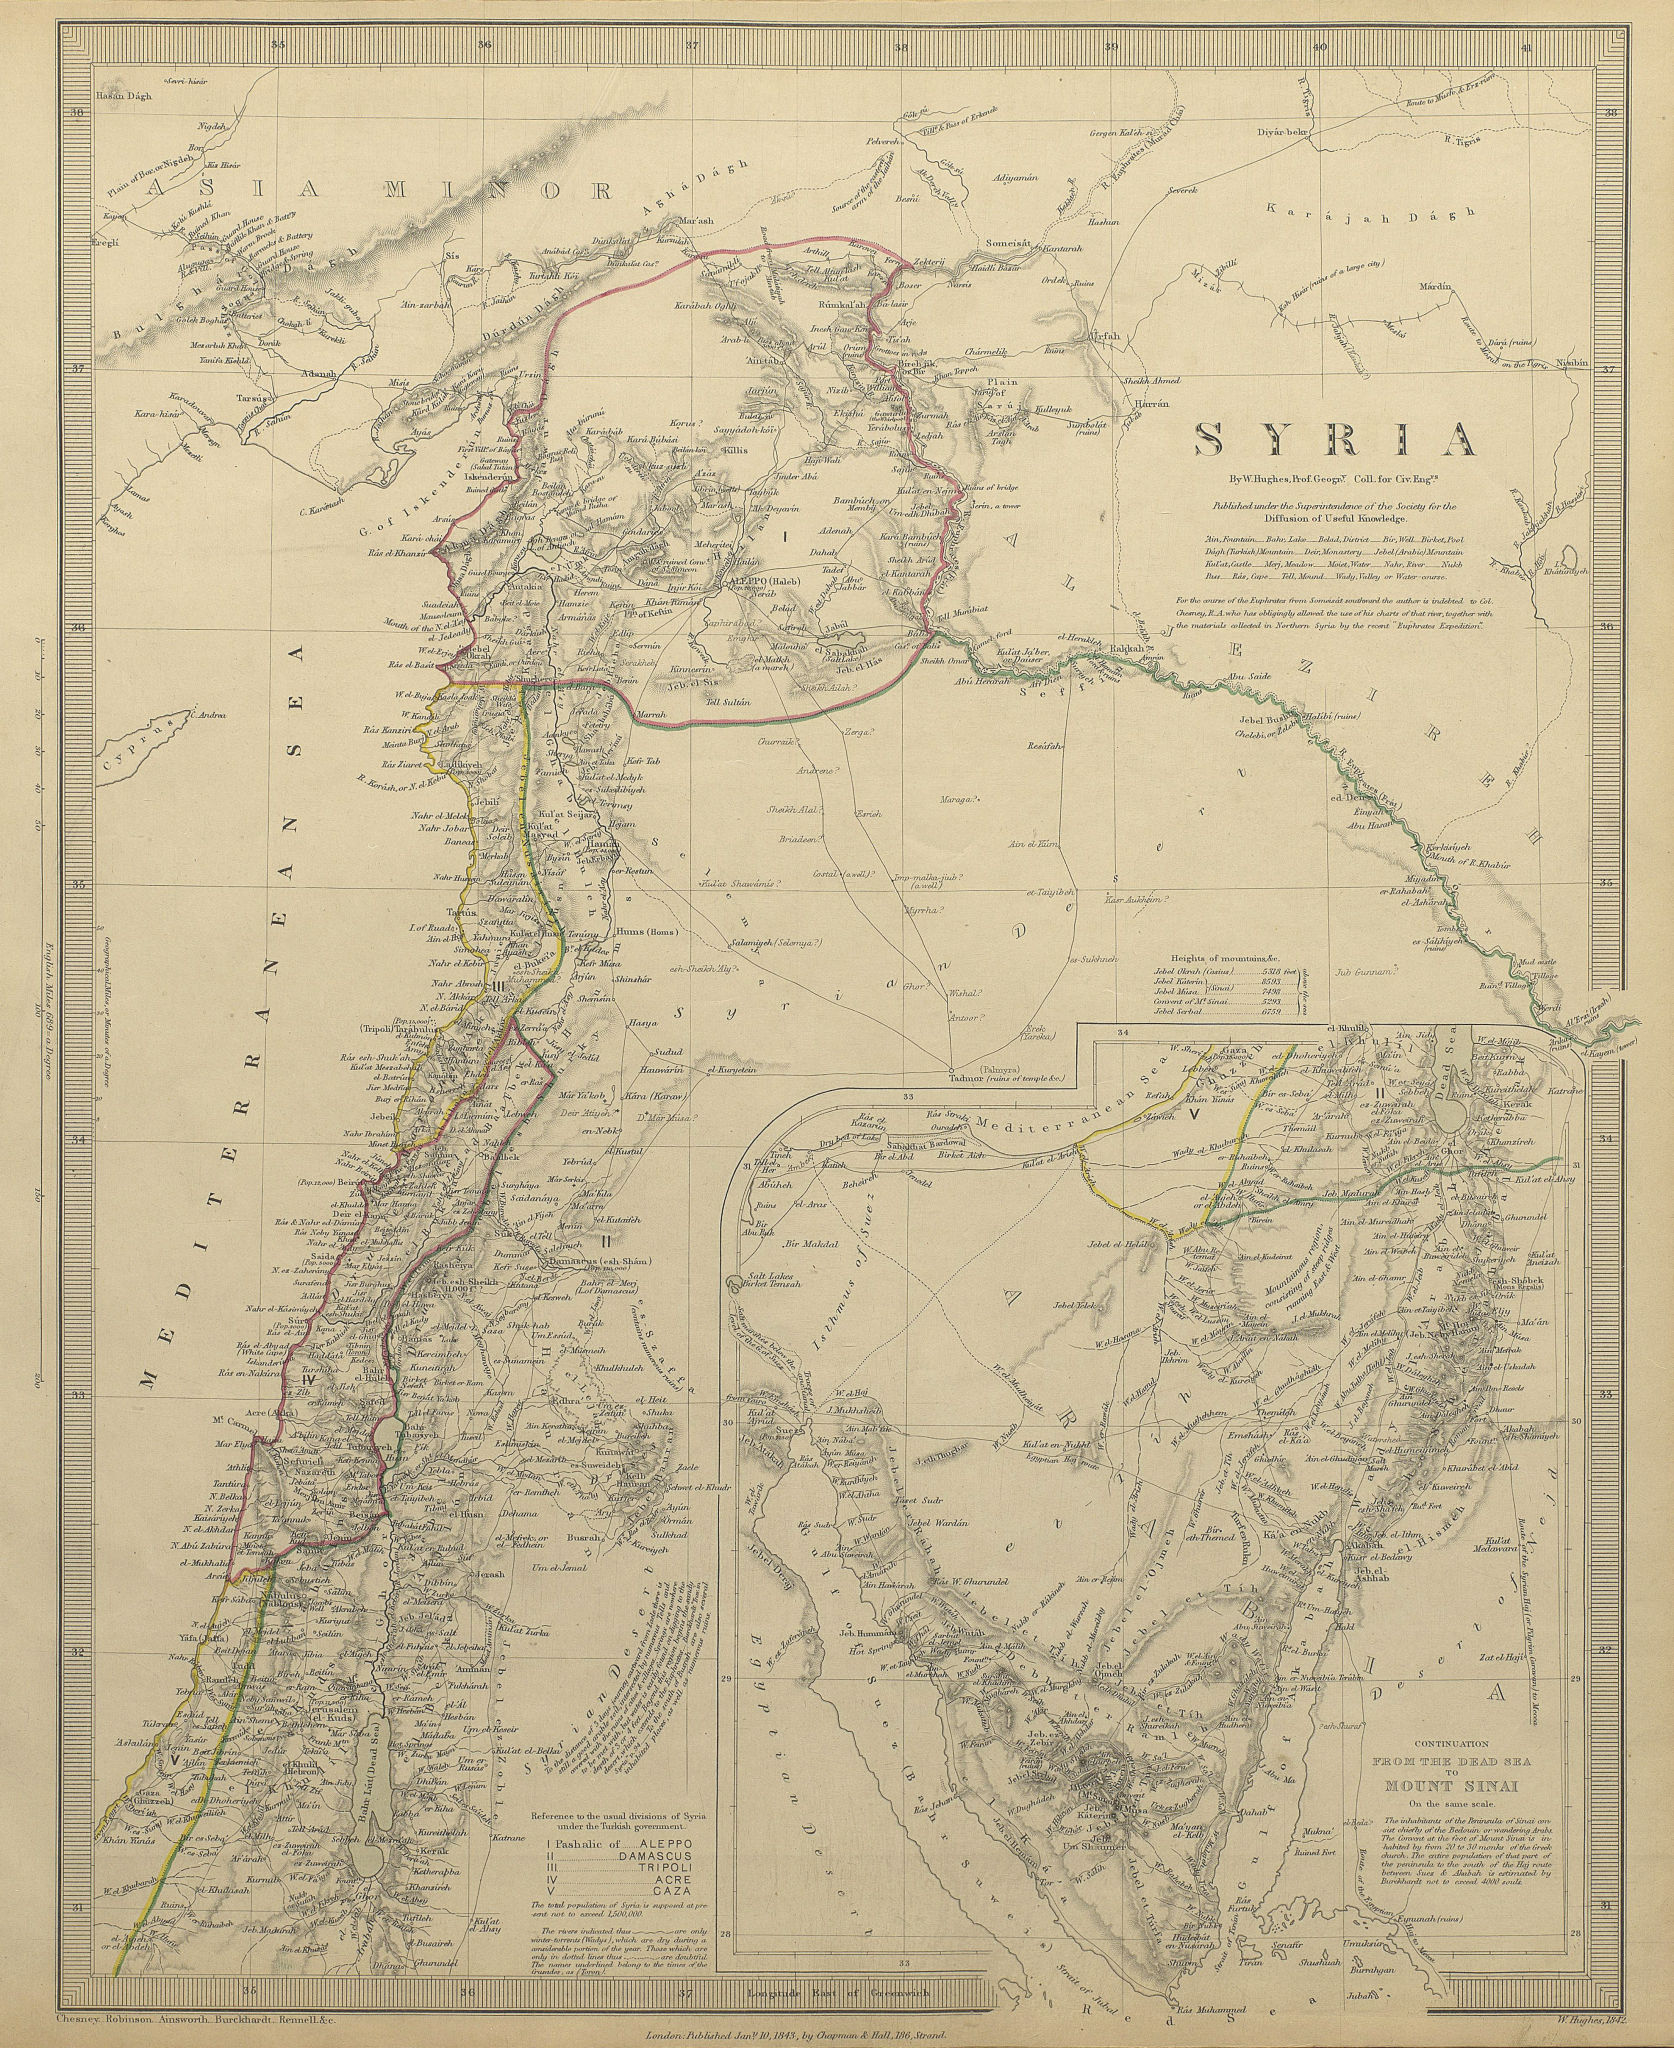 Associate Product LEVANT. Syria (Modern) ; inset from the Dead Sea to Mount Sinai. SDUK 1844 map